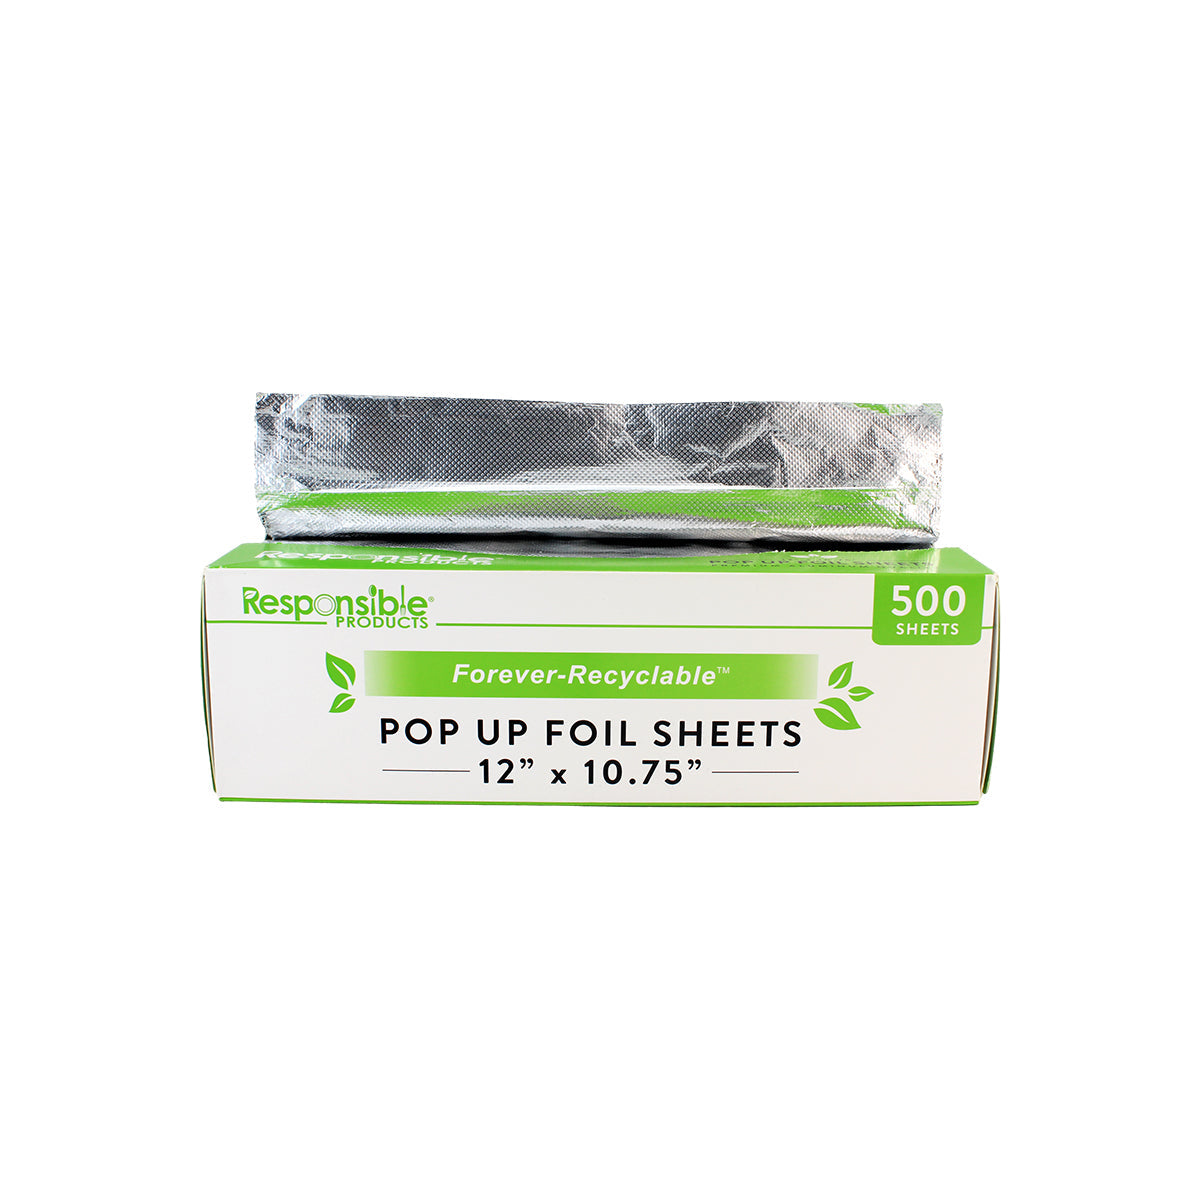 Recyclable Foil Sheets | Made by Responsible Products® (Box of 500)